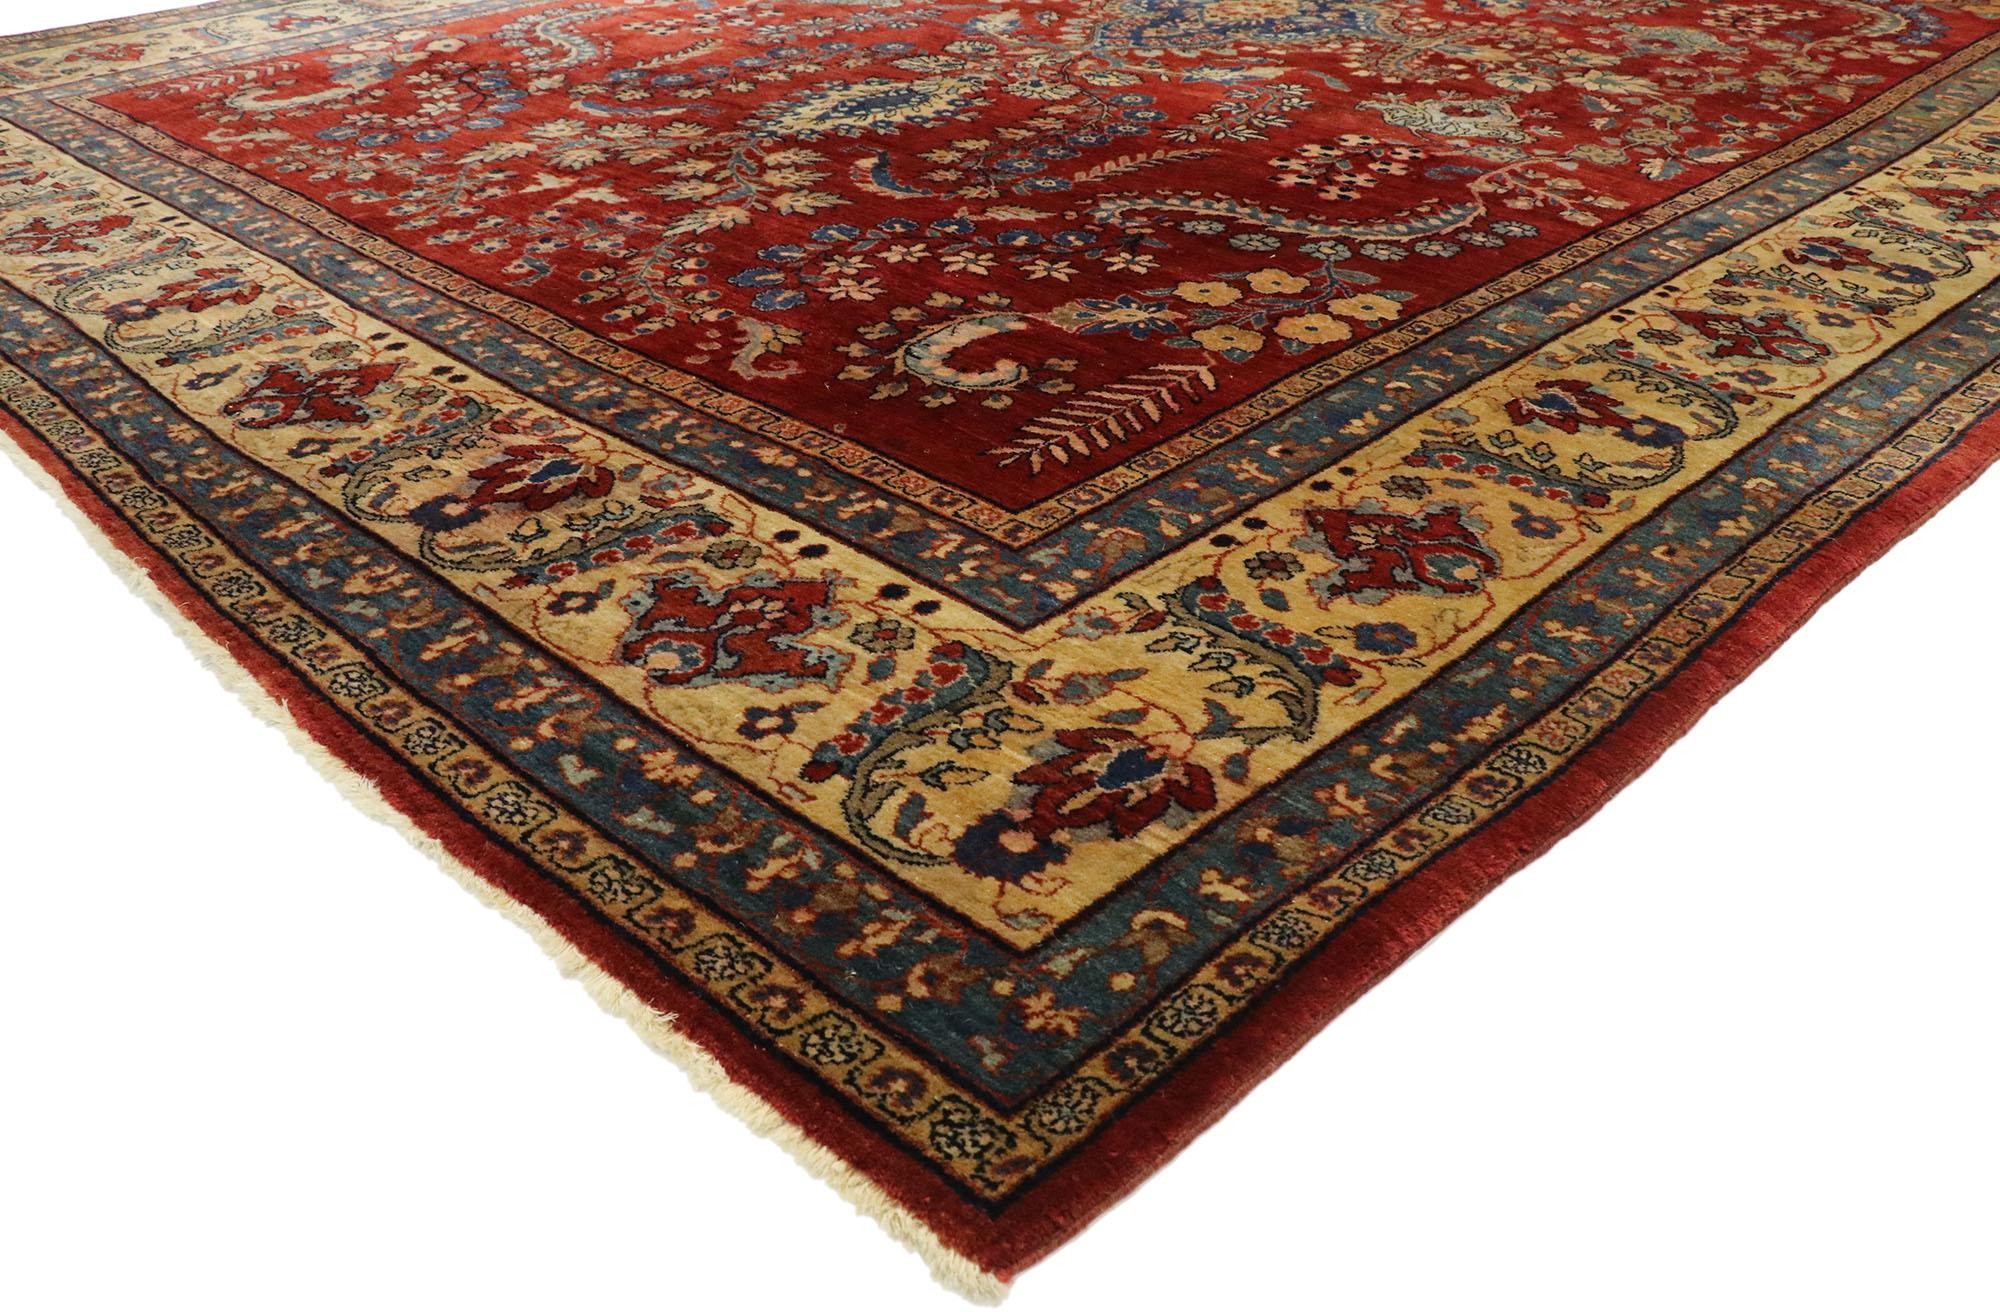 77516, antique Persian Mohajeran Sarouk rug with Jacobean style. Vibrant colors with beguiling ambiance, this hand knotted wool antique Persian Mohajeran Sarouk rug is poised to impress. The abrashed dark ruby red field is covered in an all-over